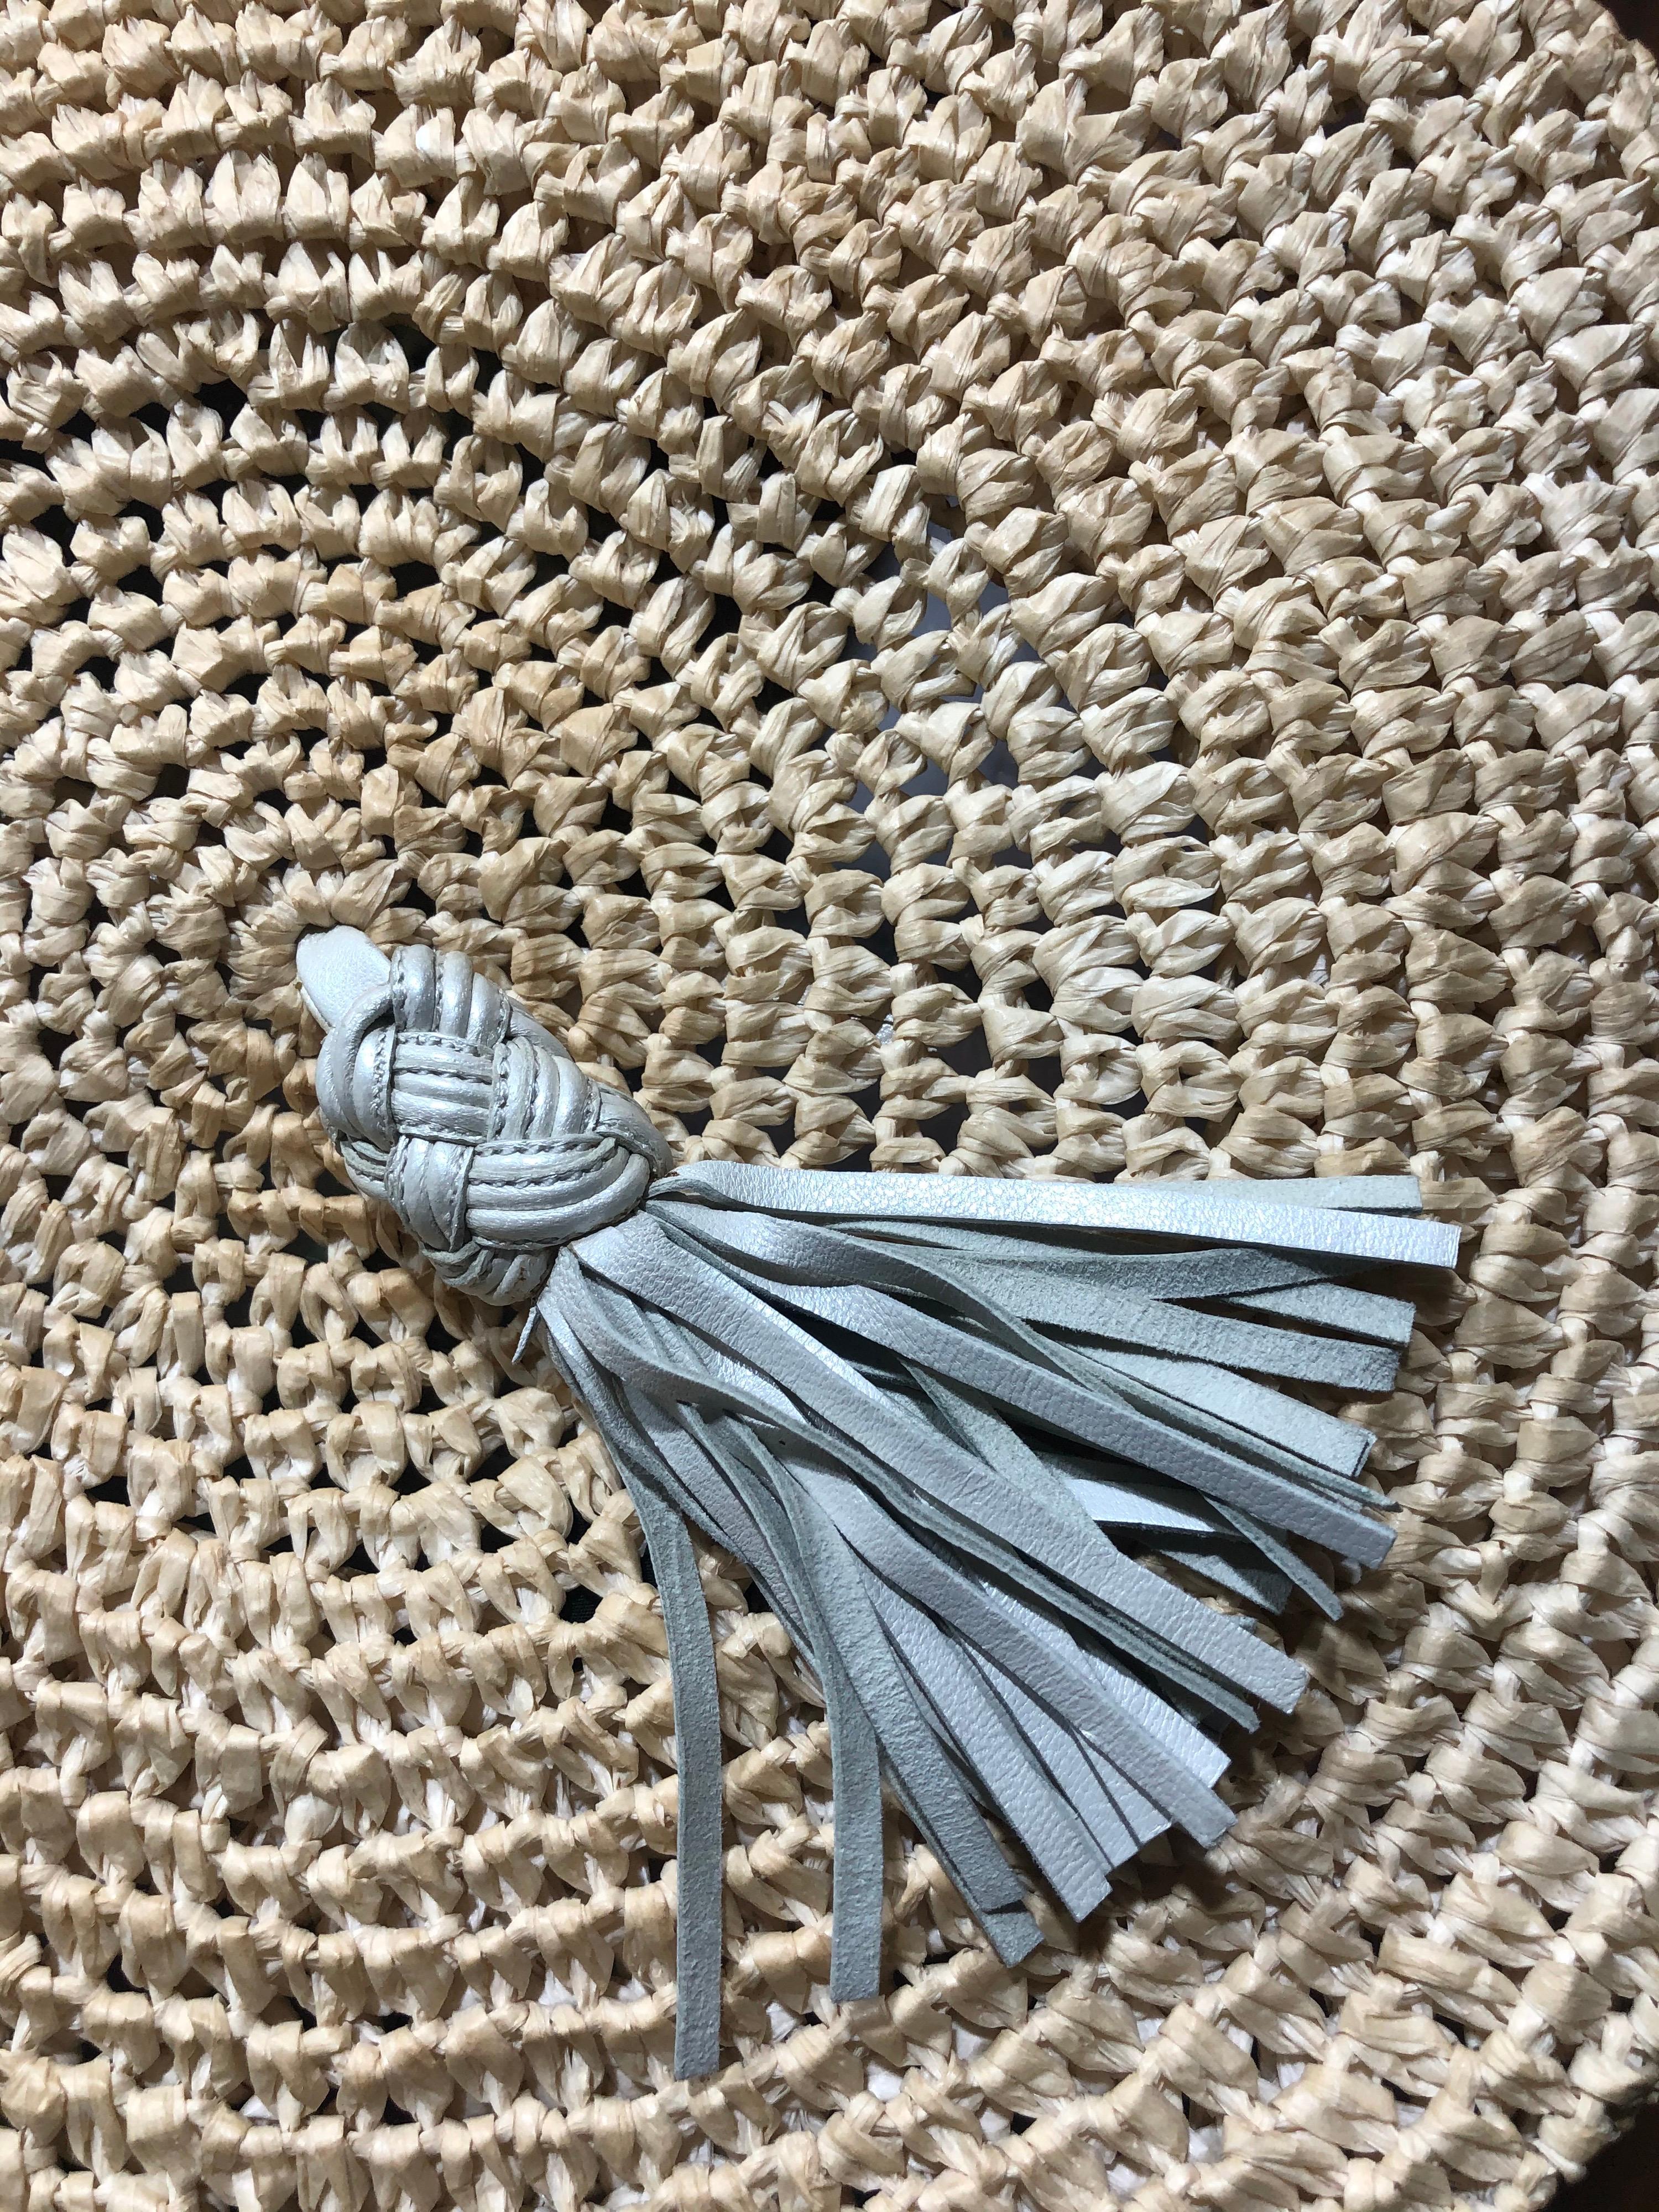 If you're a lover of Beret's than this is one to add to your collection. 1980's Bottega Veneta Beret straw hat featured with a metallic silver/white leather tassel. Dead stock with original tags. The perfect cap to style with your Chanel outfit and